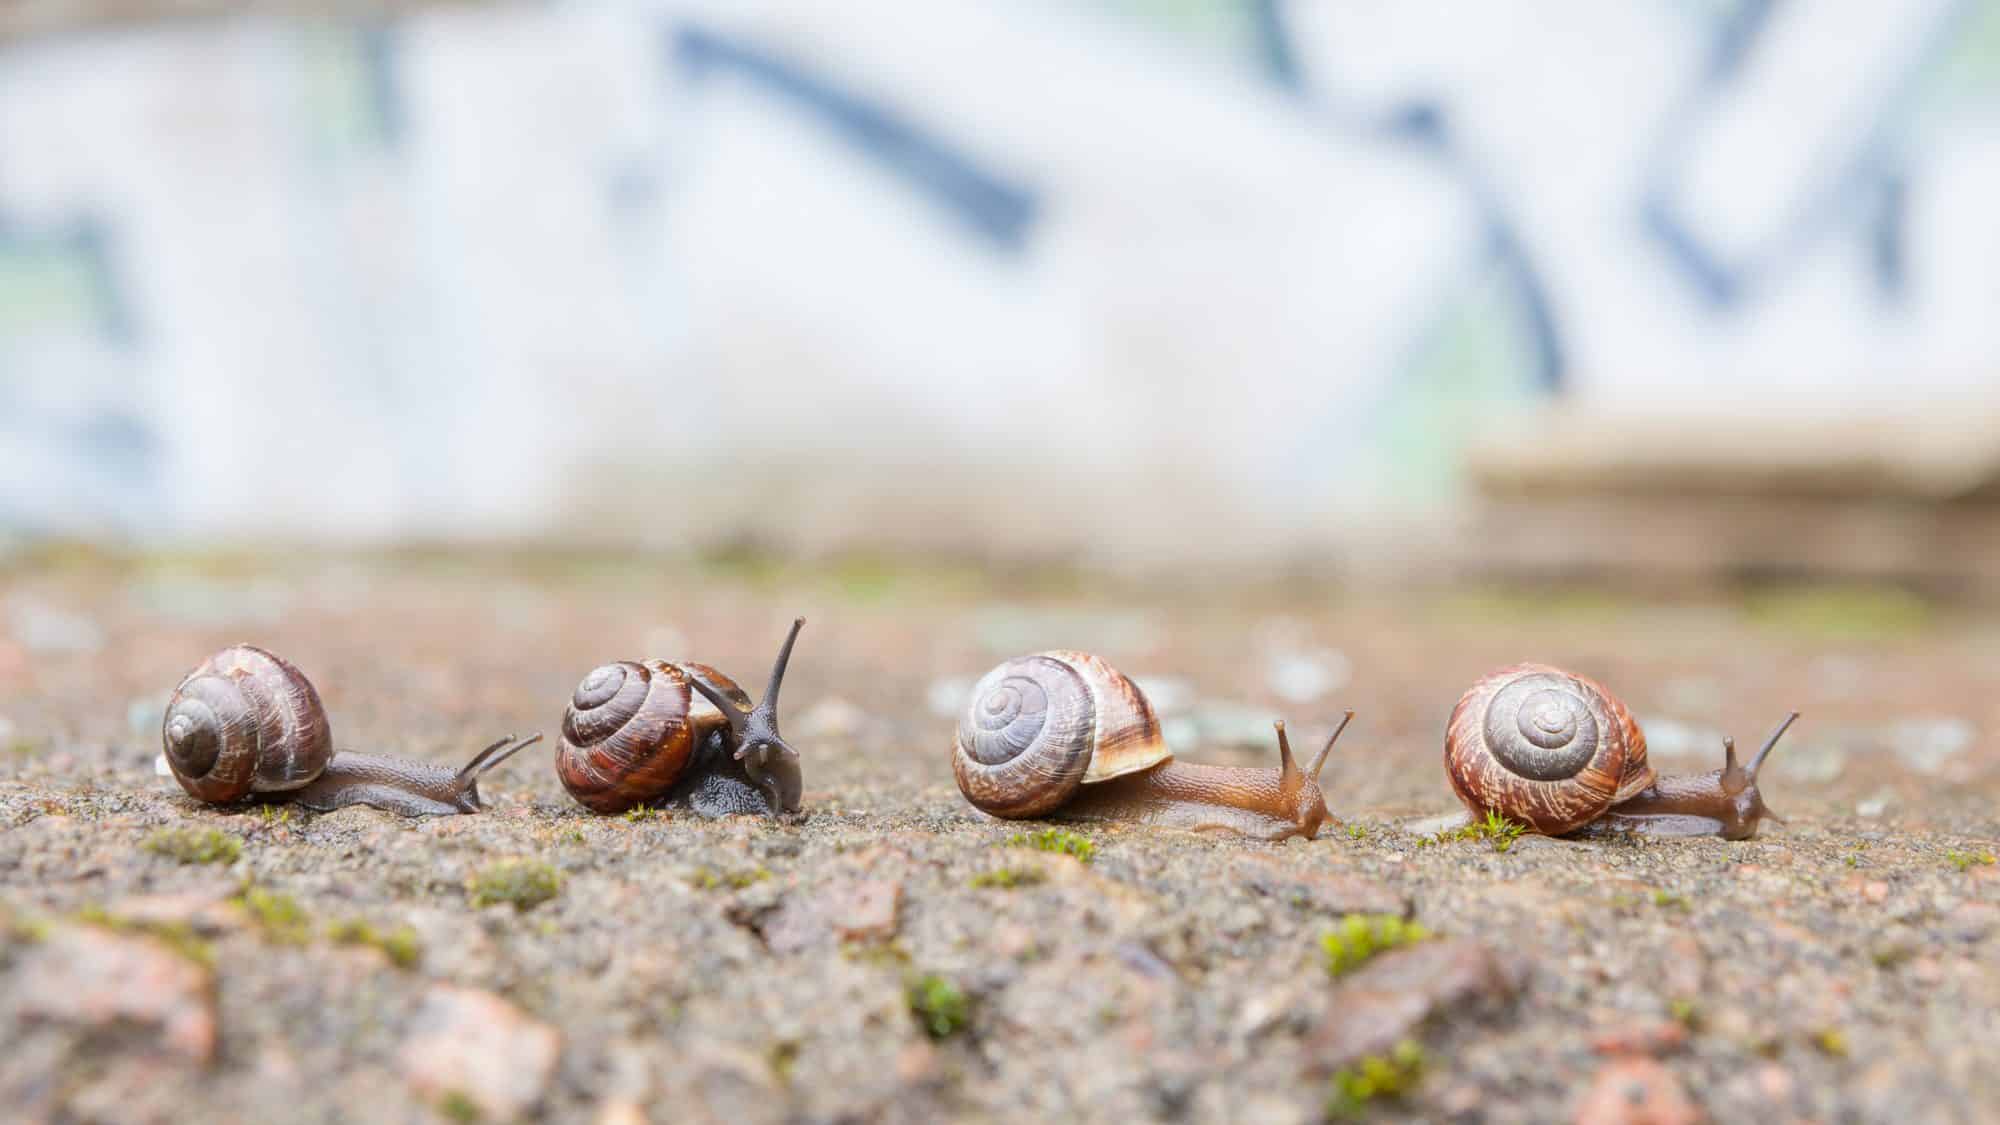 Snails moving over the ground